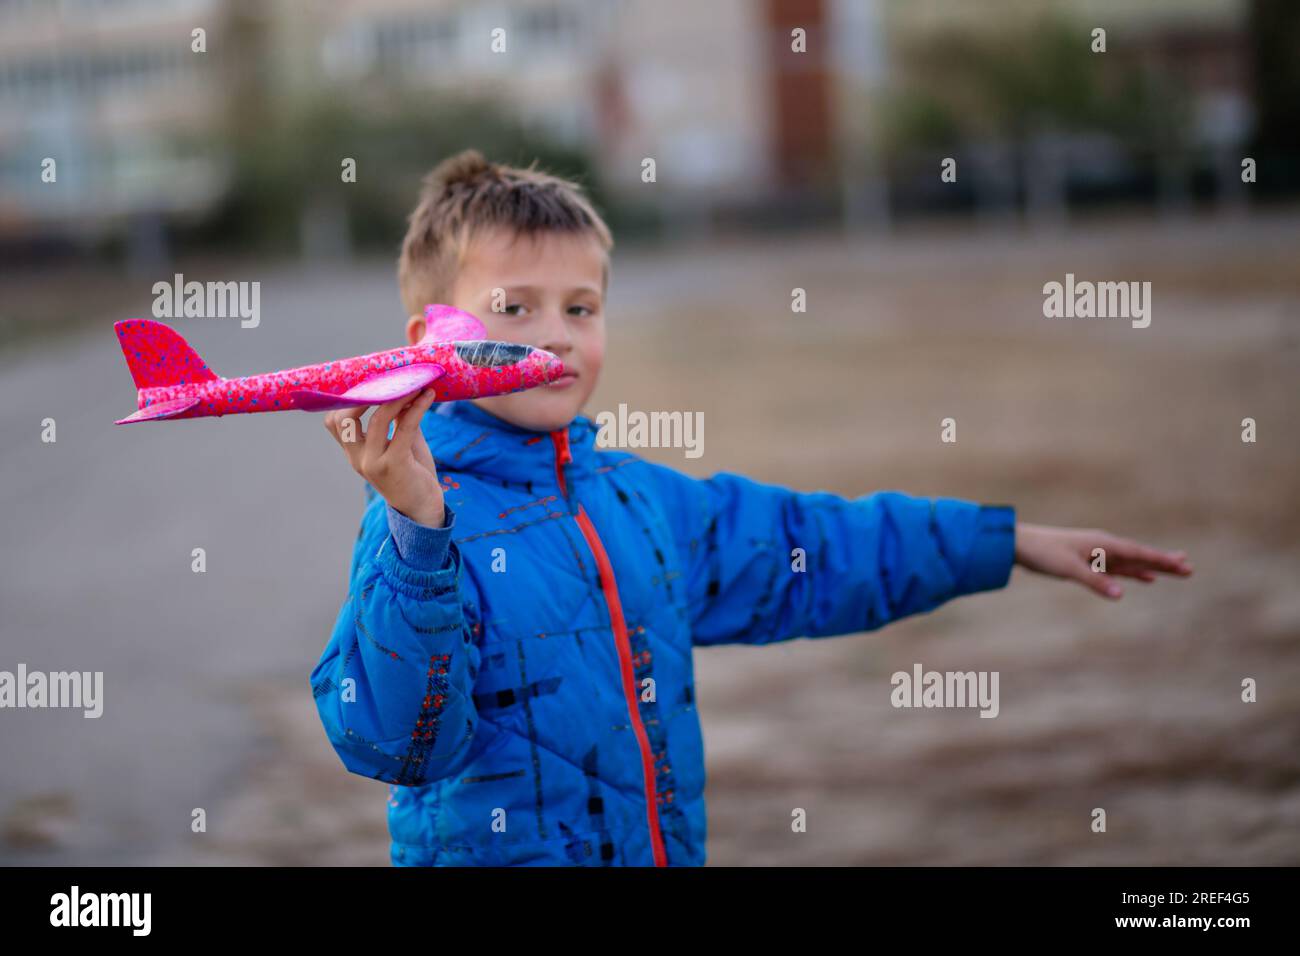 little pilot With a toy airplane in hand at the sports ground. Children's toys for outdoor play in autumn Stock Photo